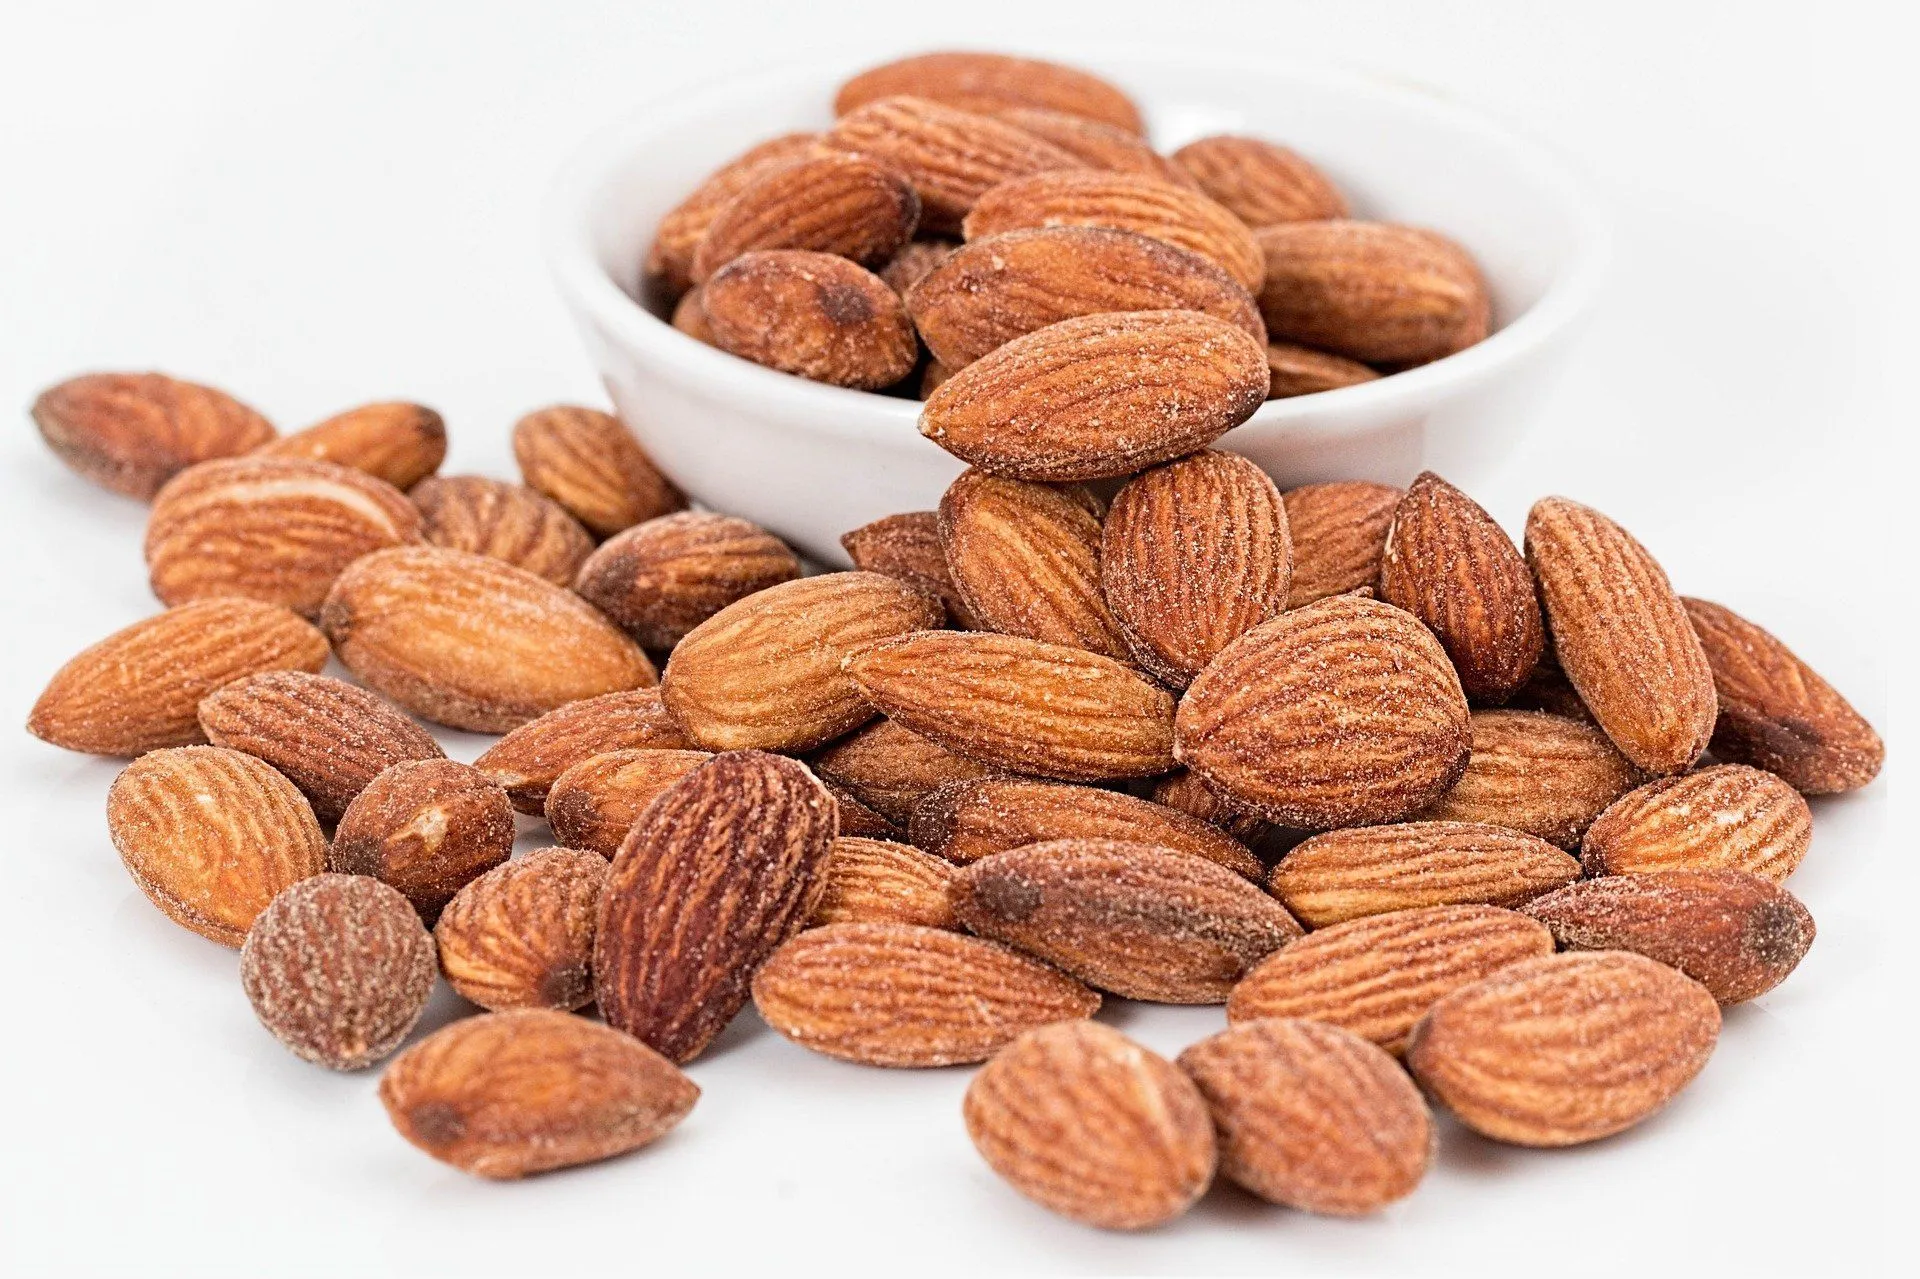 People allergic to tree nuts should avoid almond butter.